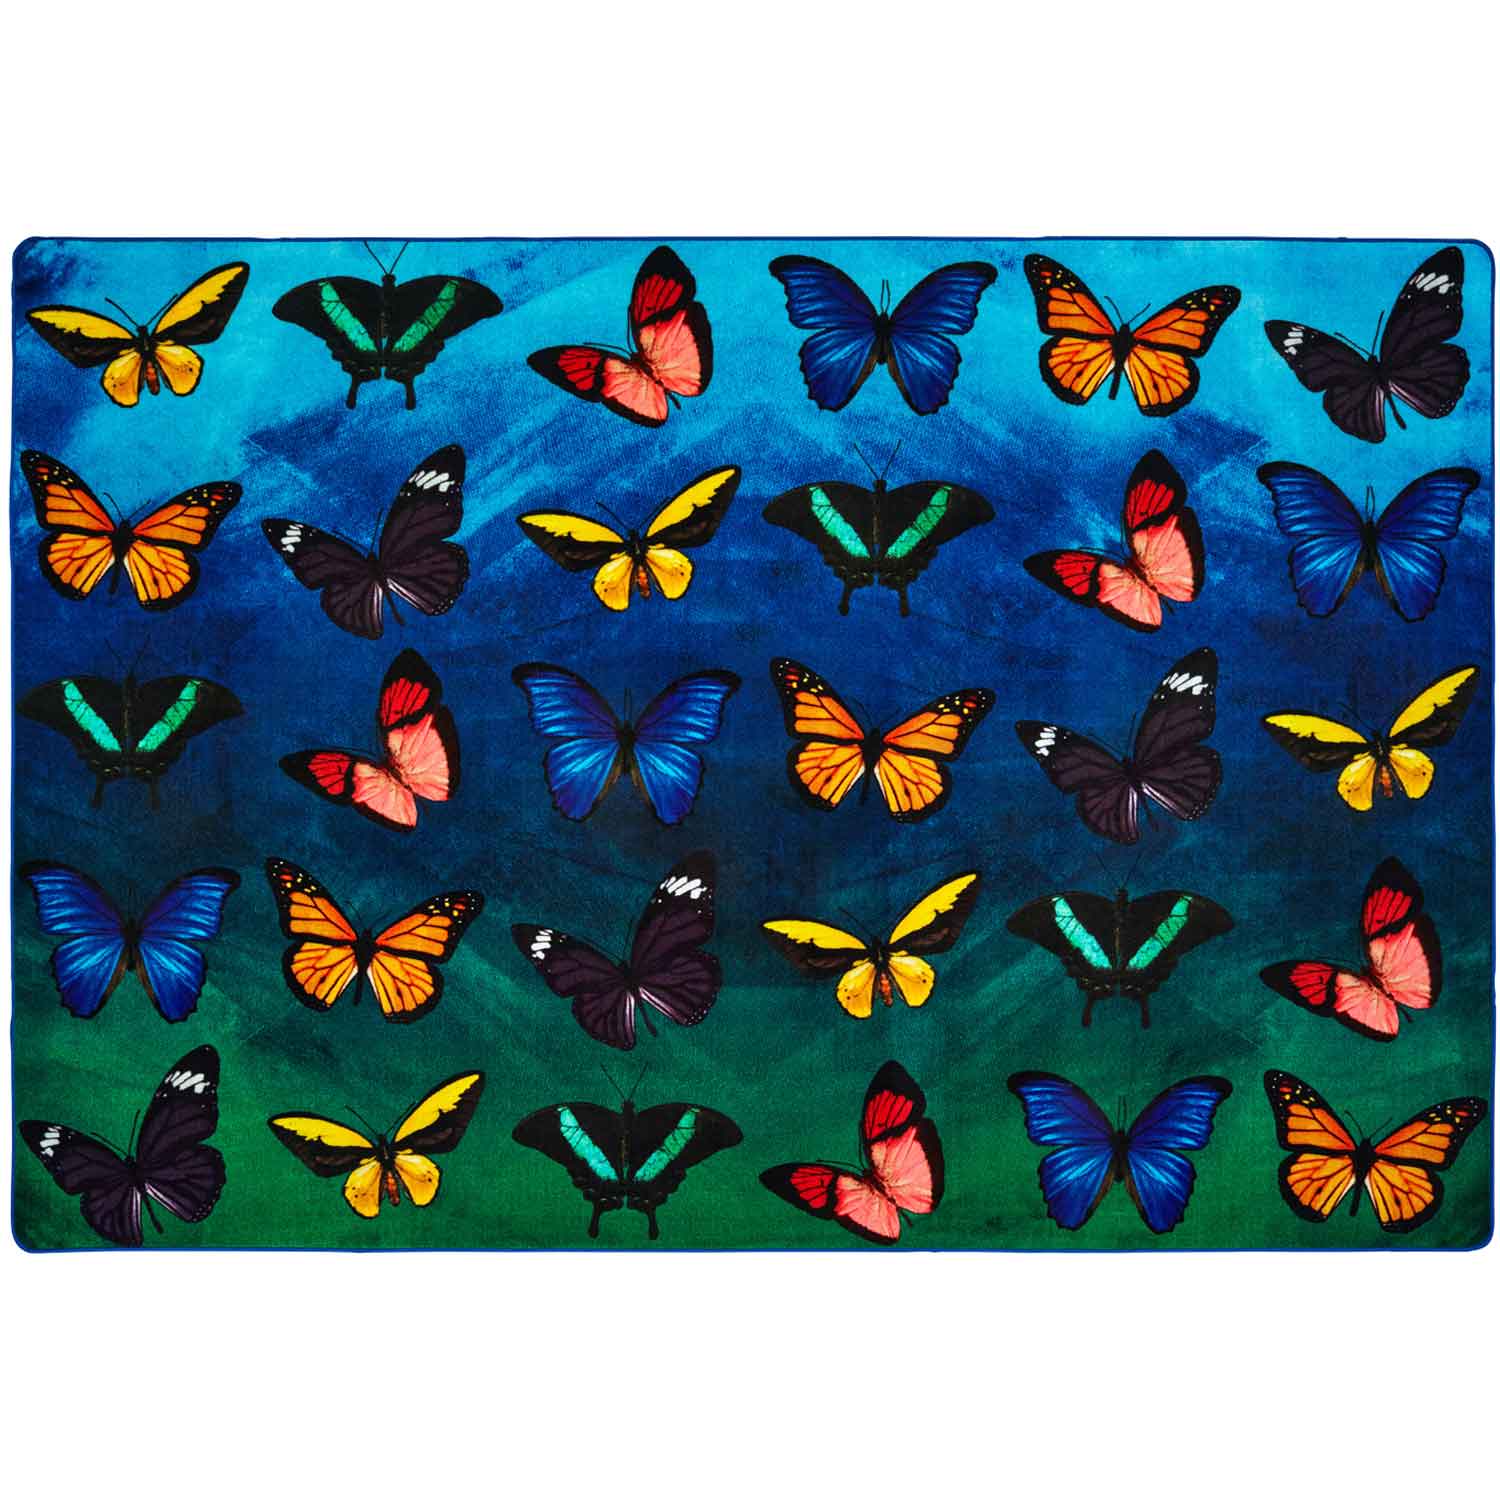 Beautiful Butterfly Seating Rug, Rectangle 8' x 12'